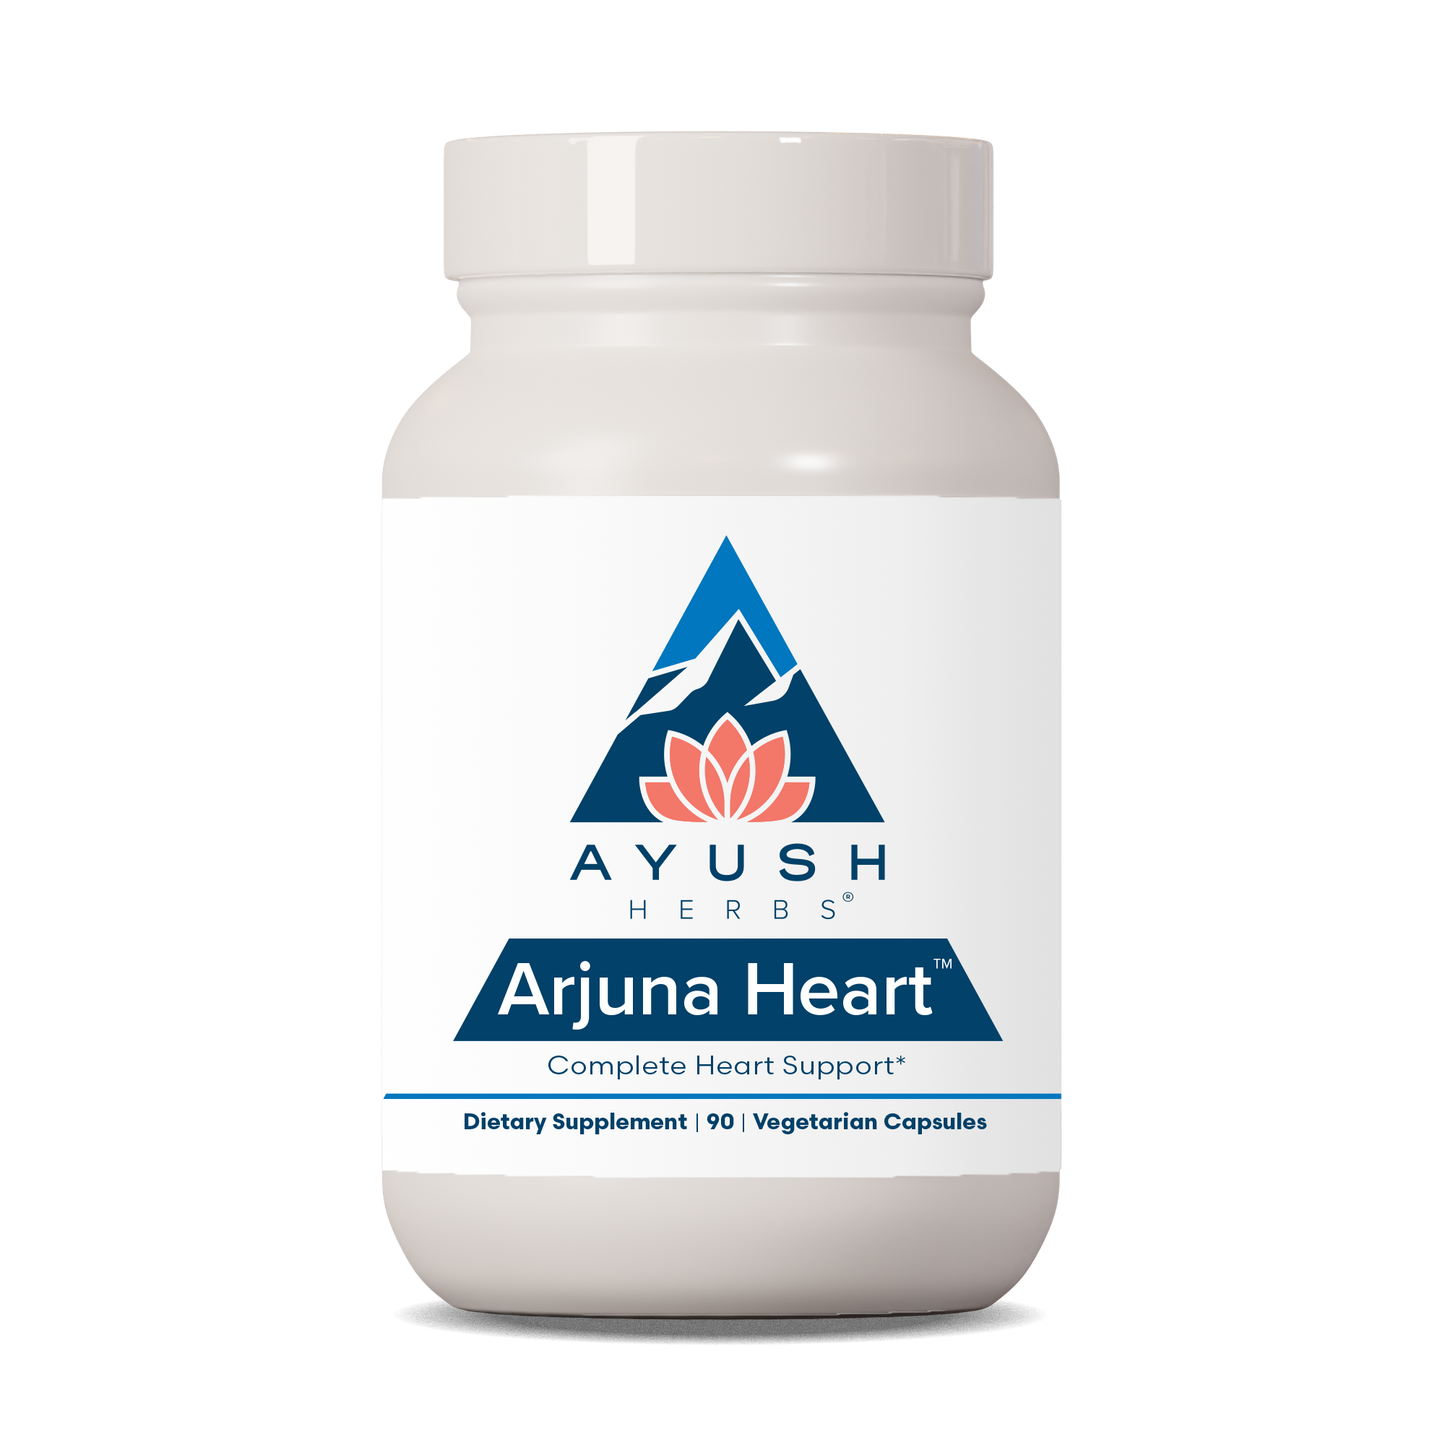 Arjuna Heart bottle front by Ayush herbs herbal supplements